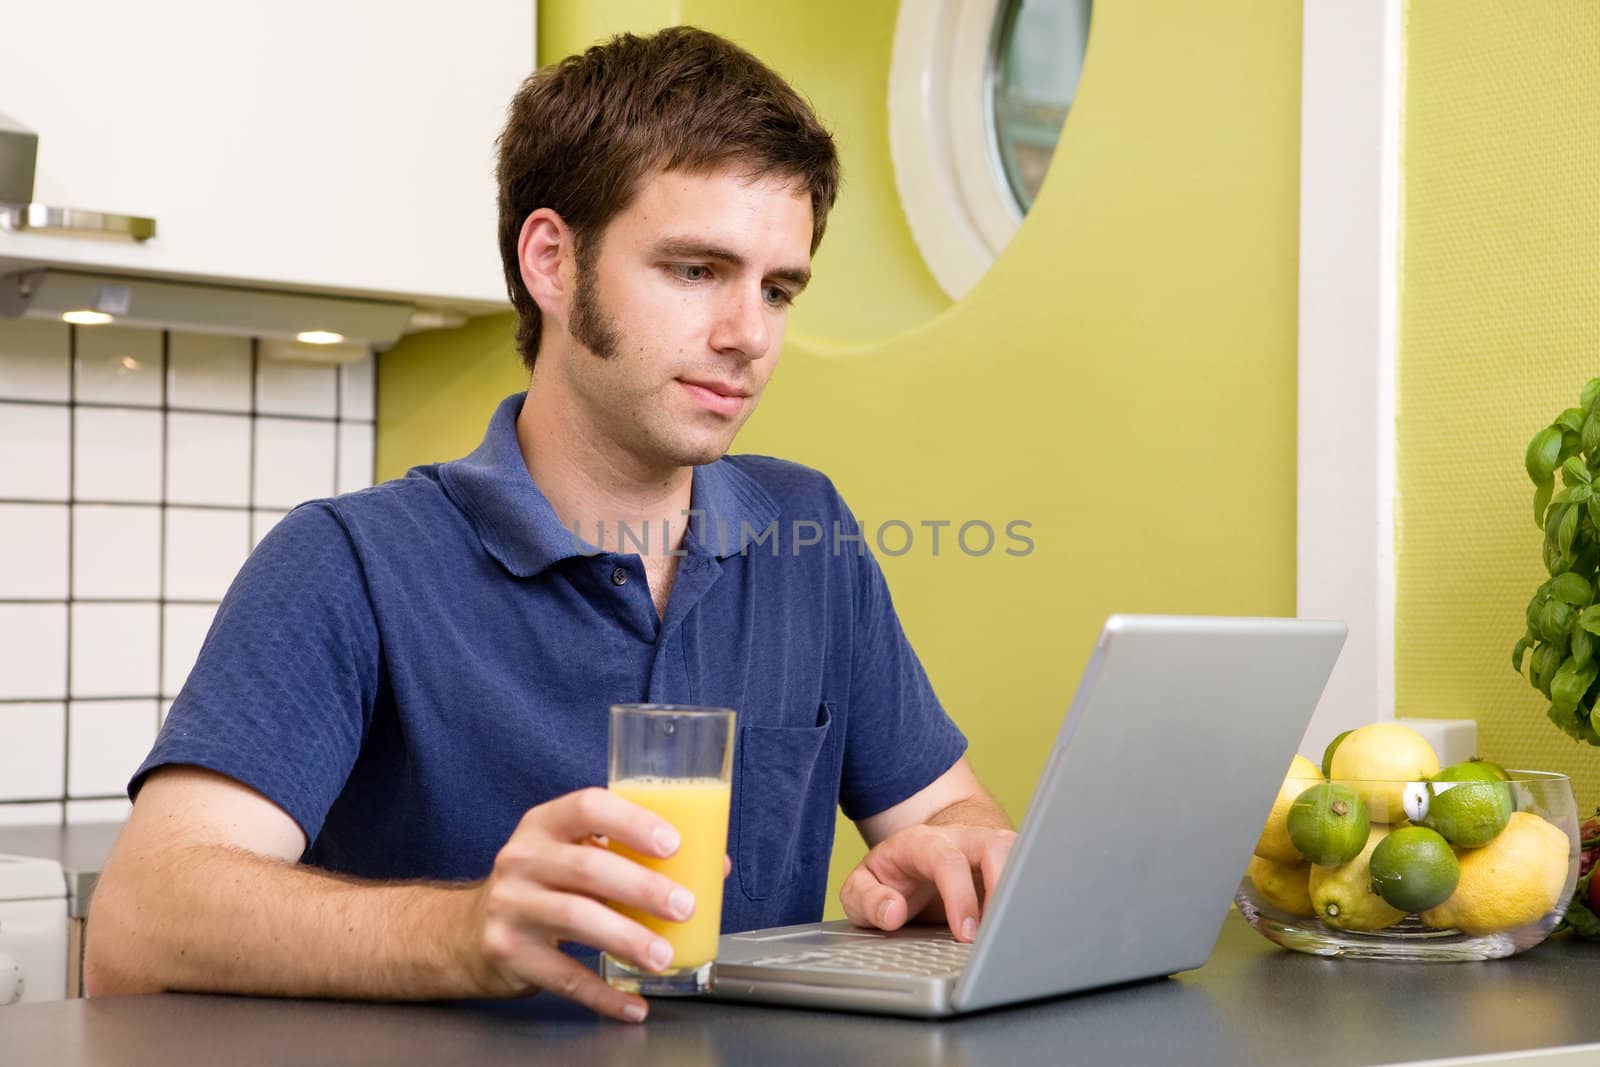 Using Computer with Juice by leaf